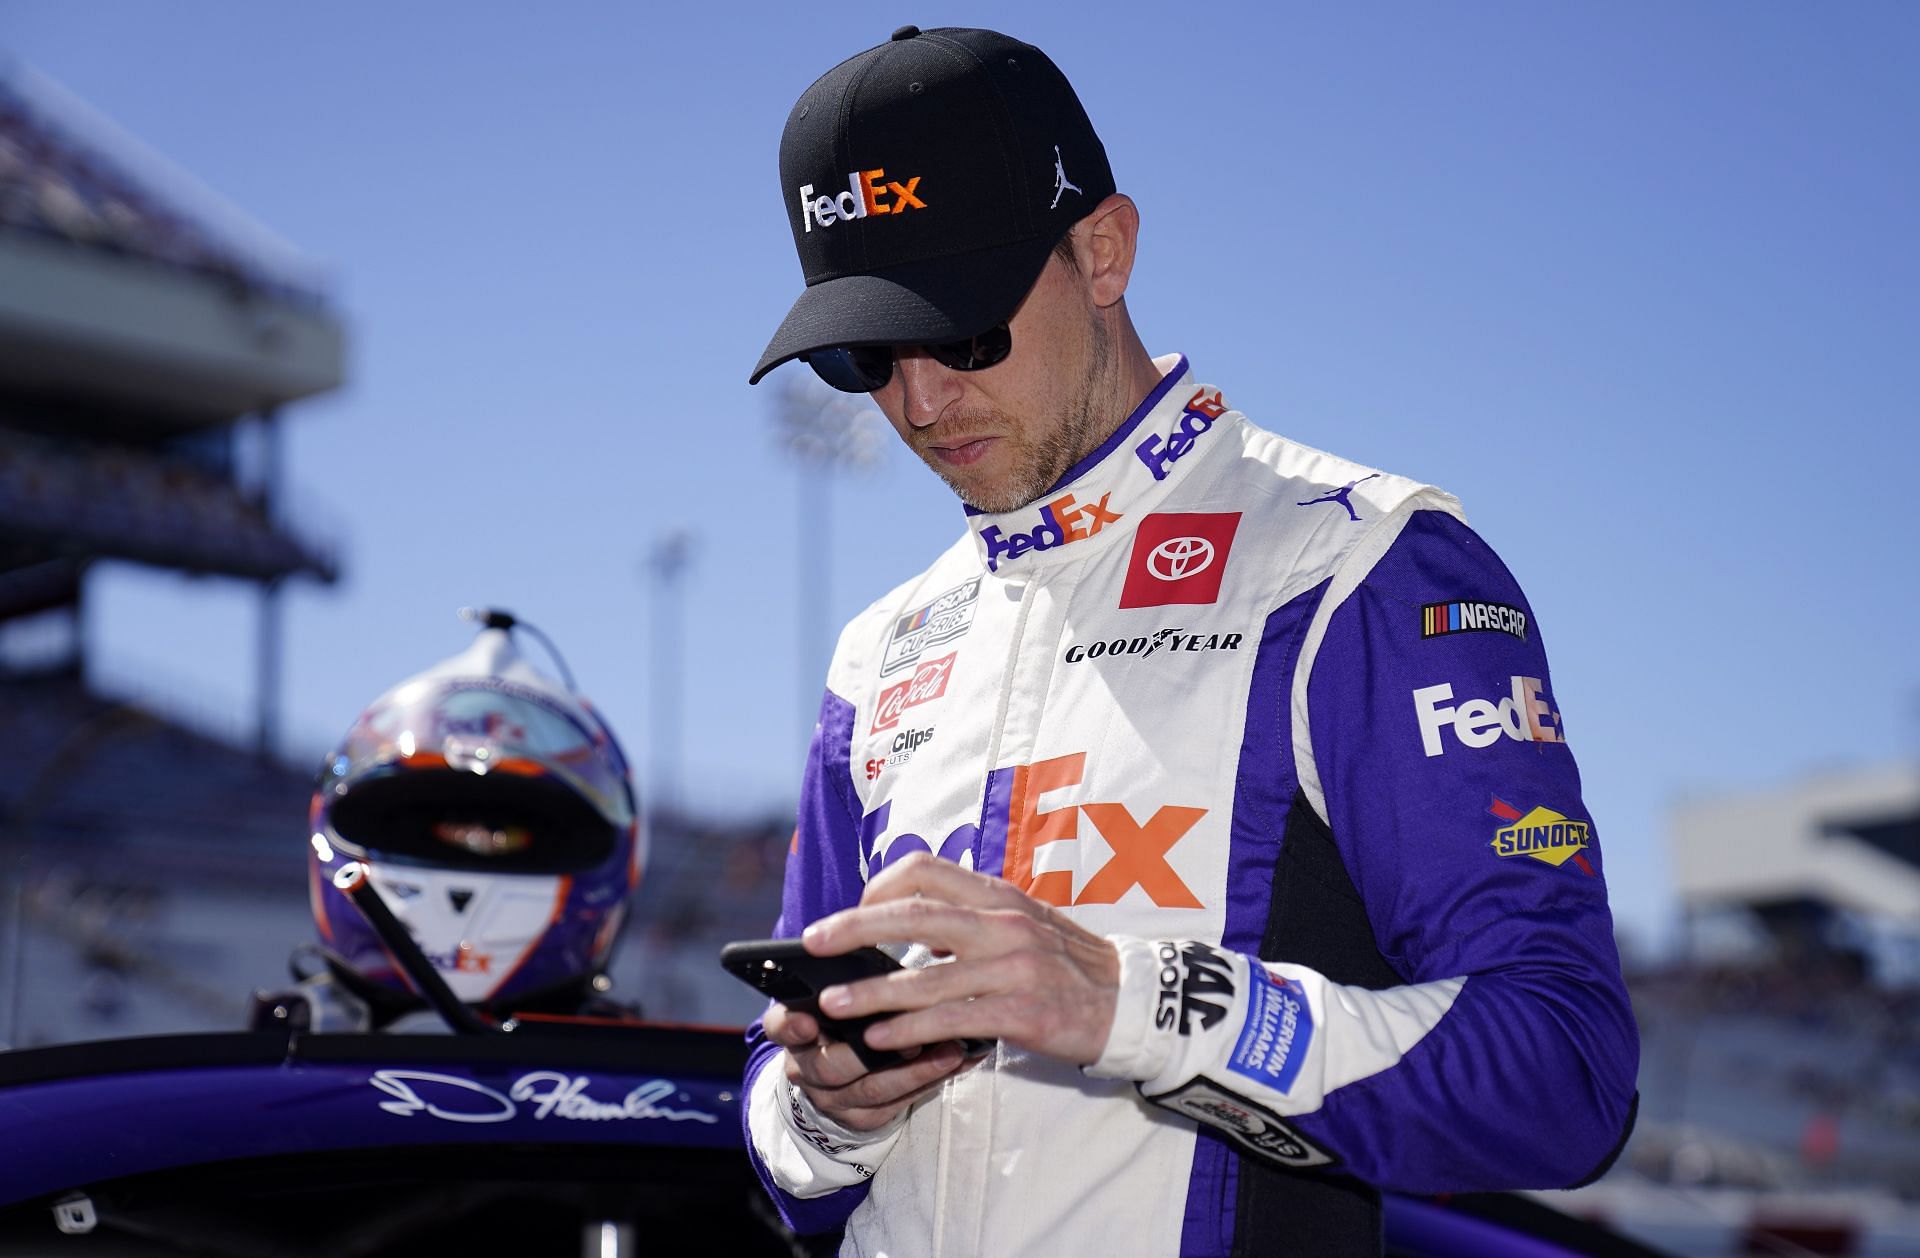 Denny Hamlin uses his cell phone on the grid during qualifying for the NASCAR Cup Series Toyota Owners 400 at Richmond Raceway.